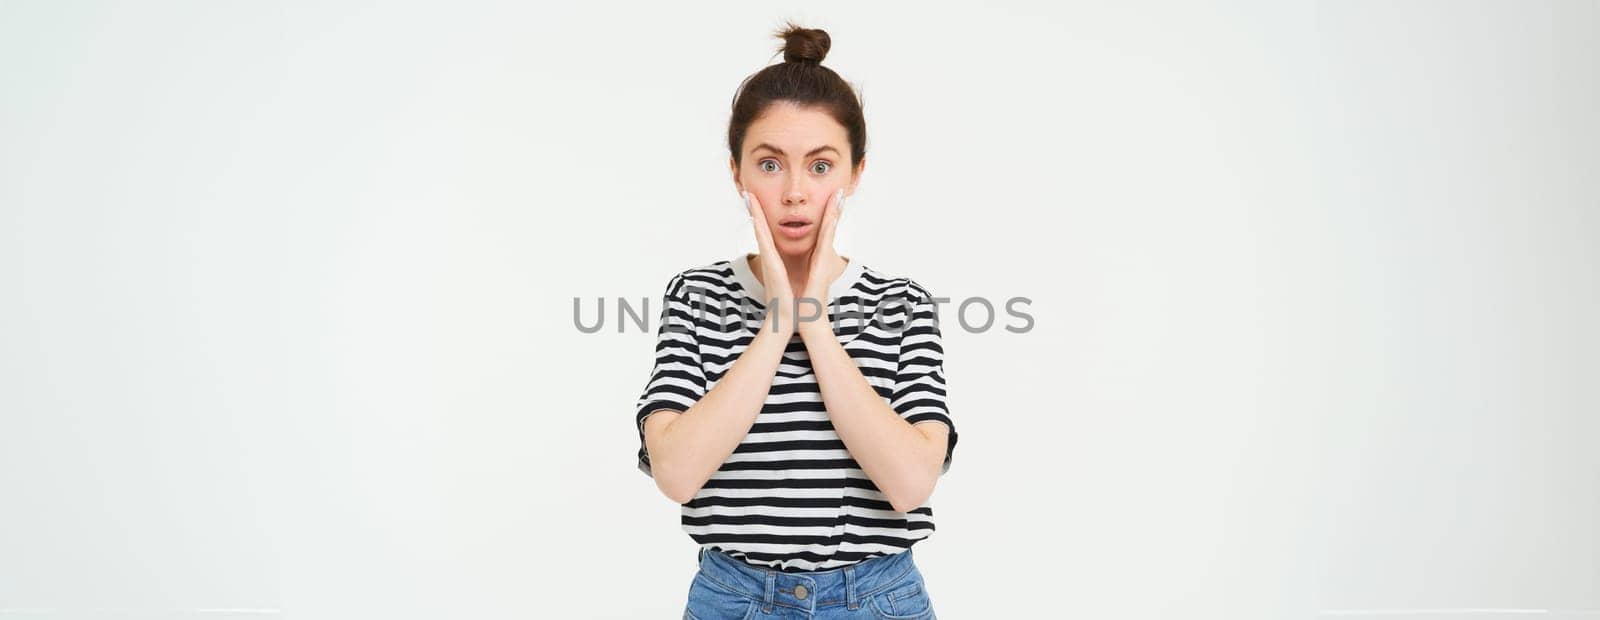 Lifestyle and emotions concept. Portrait of girl with surprised face expression, saying wow, looks impressed at camera, stands over white background.